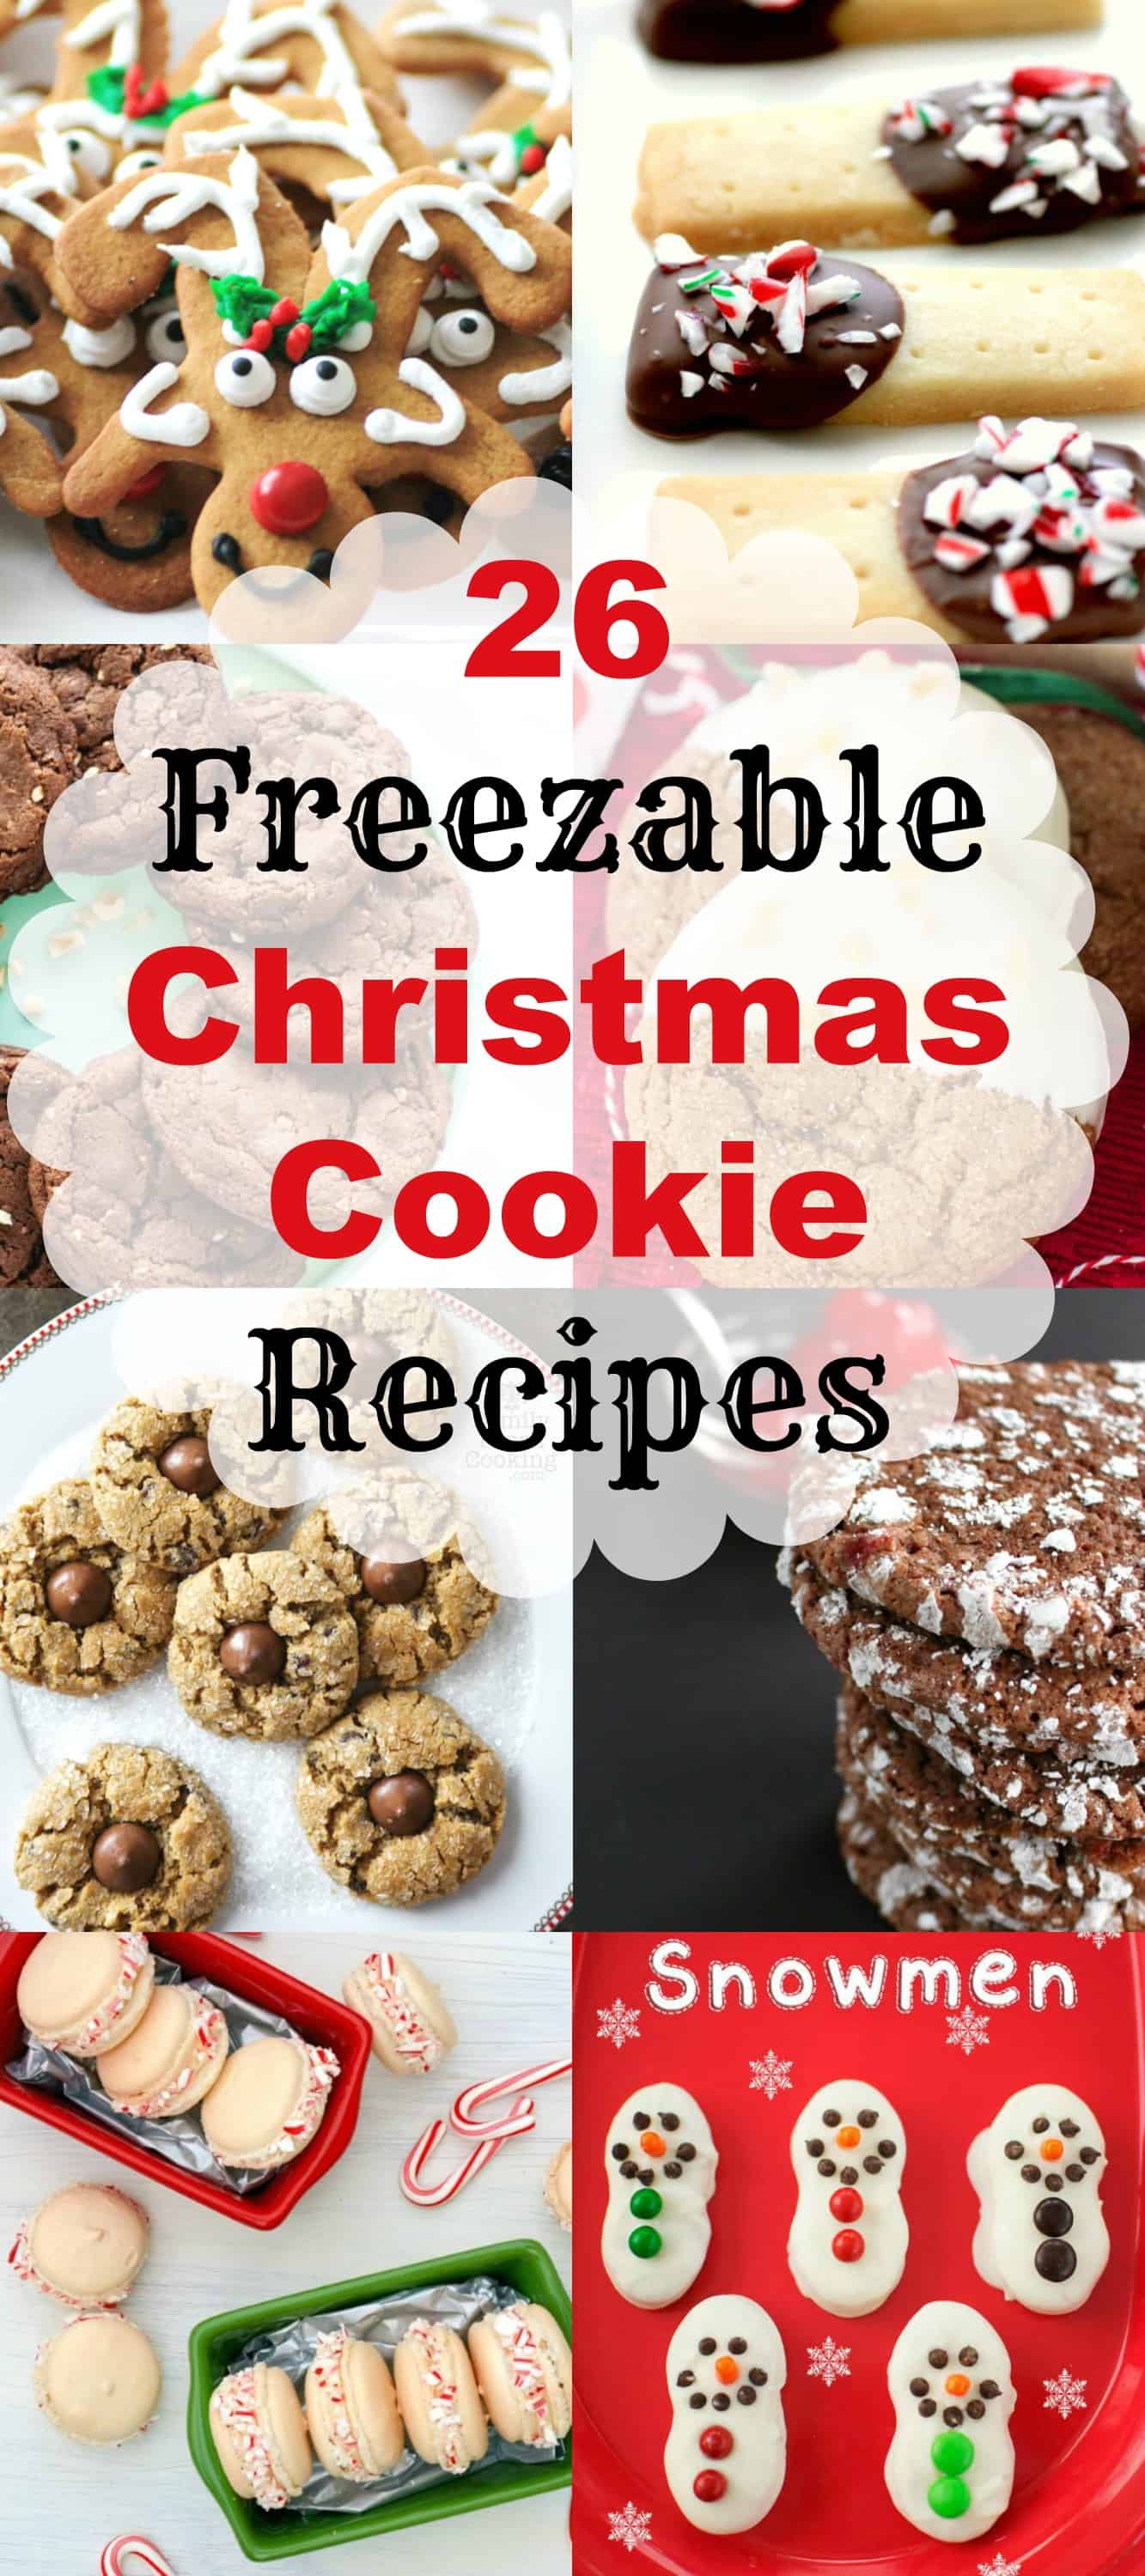 26 Freezable Christmas Cookie Recipes Make Ahead Christmas Cookies Submit a new christmas cookie recipe or review one you've made. 26 freezable christmas cookie recipes